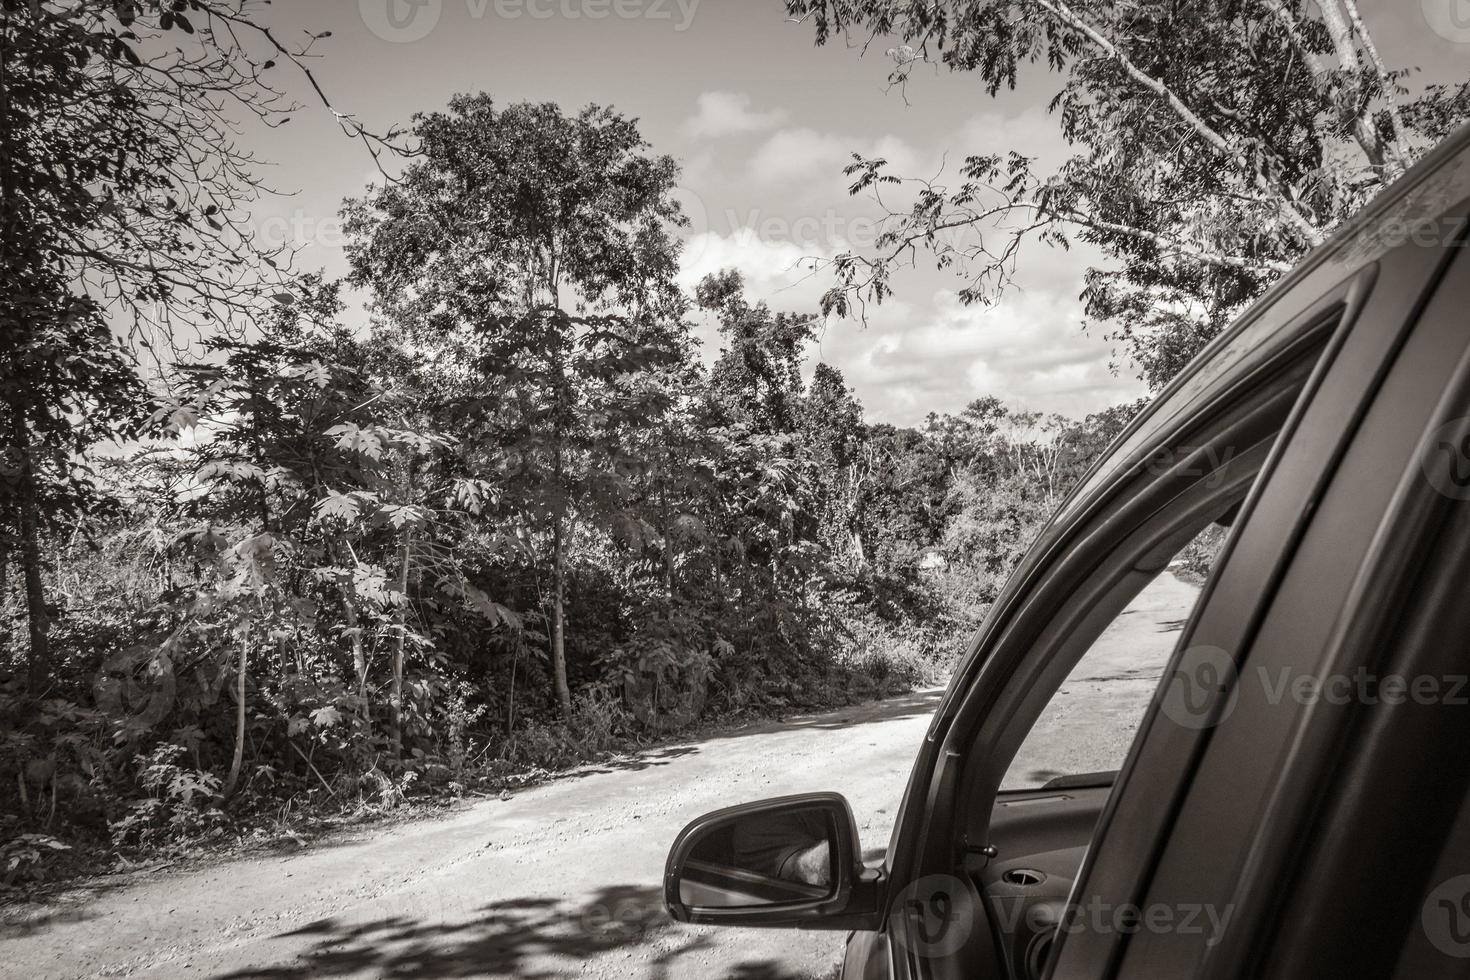 Driving on gravel path road in Tulum jungle nature Mexico. photo